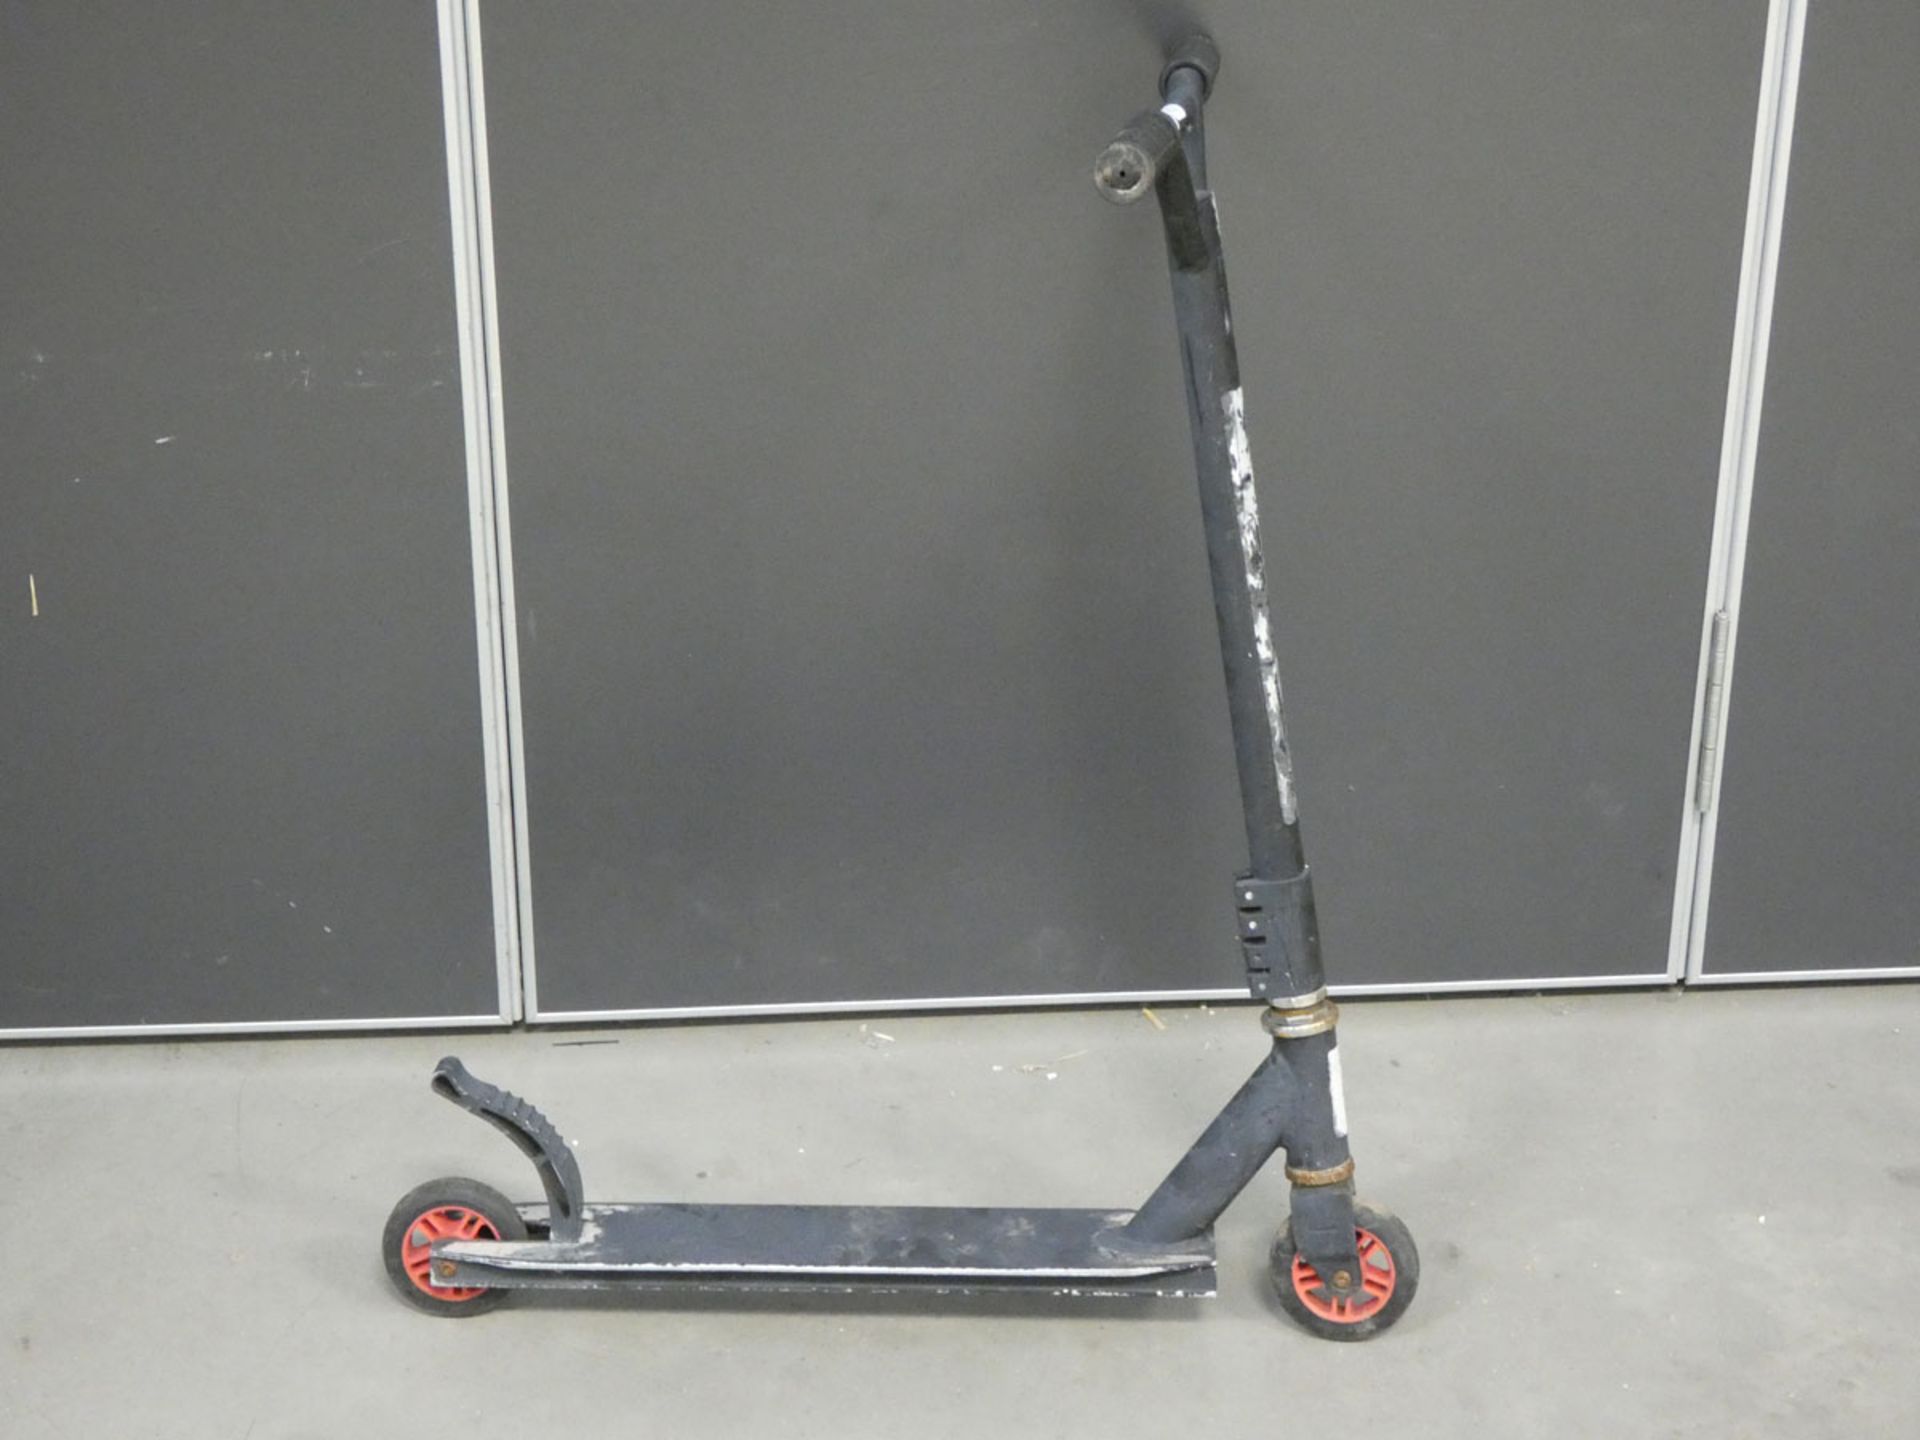 Small black scooter